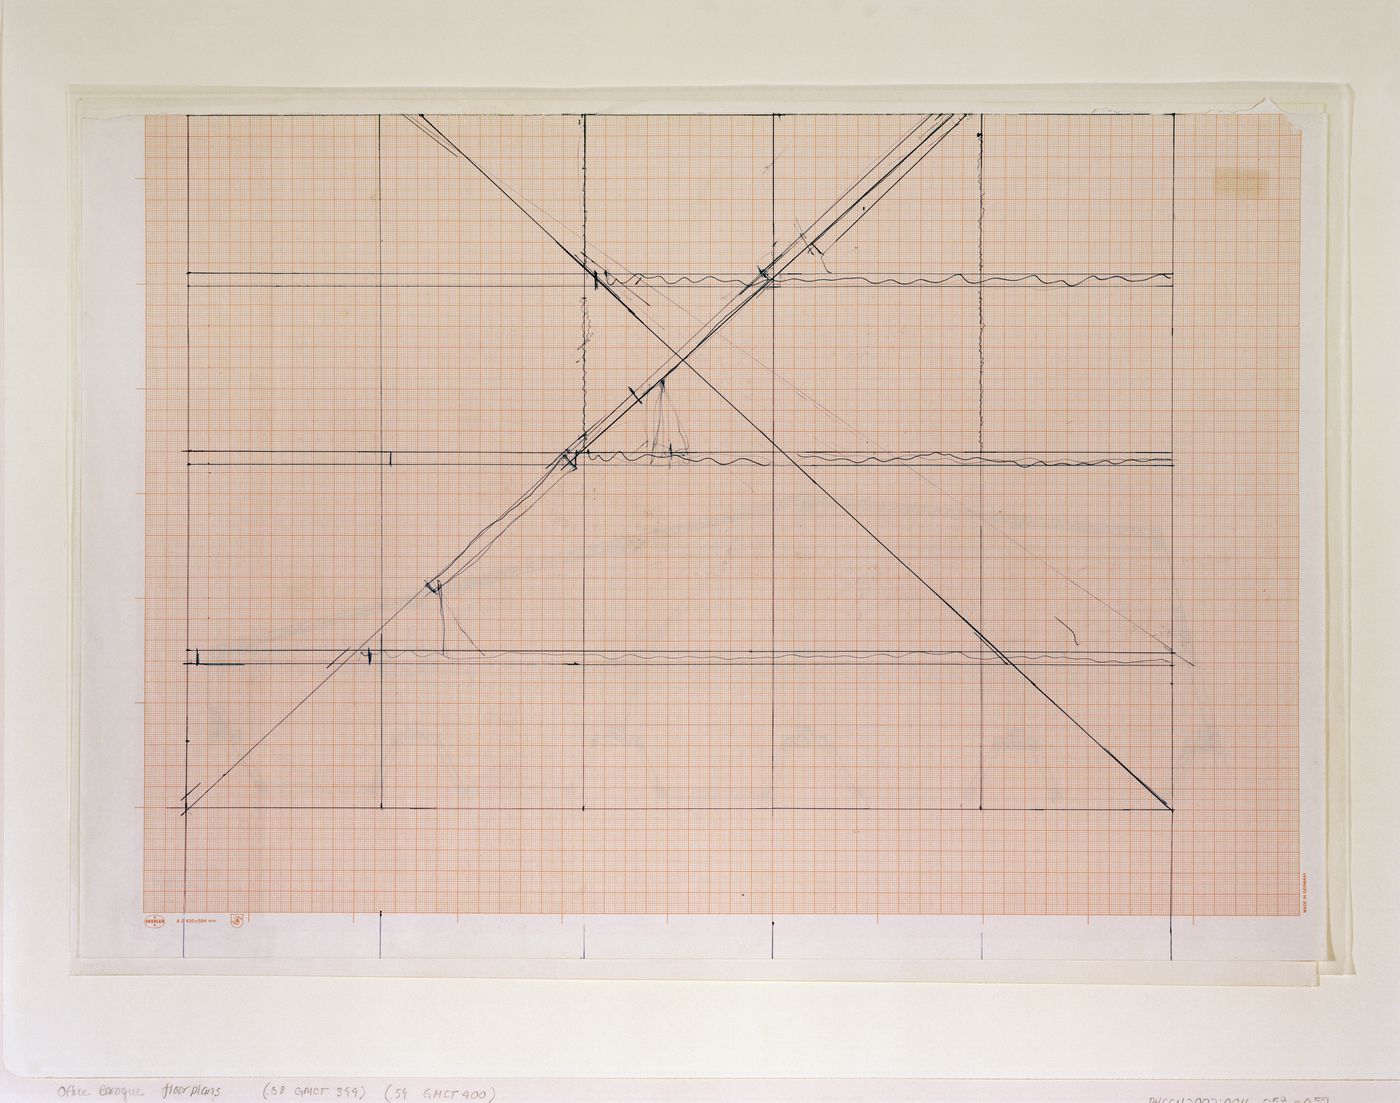 Questioning Pictures: Photograph of floor plan for Office Baroque, blue pen on graph paper by Gordon Matta-Clark, 1977